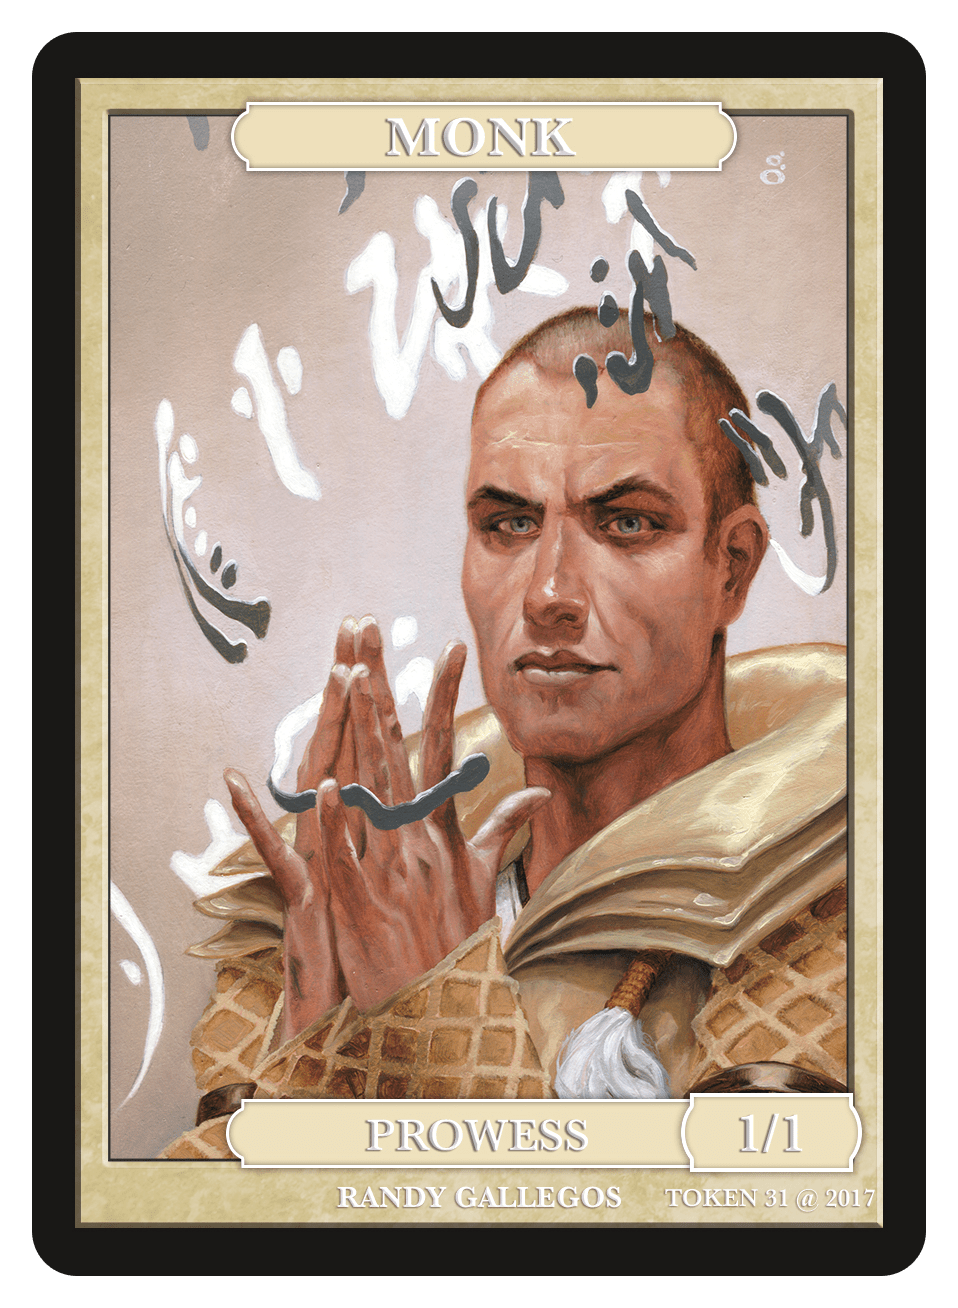 Monk Token (1/1 - Prowess) by Randy Gallegos - Token - Original Magic Art - Accessories for Magic the Gathering and other card games